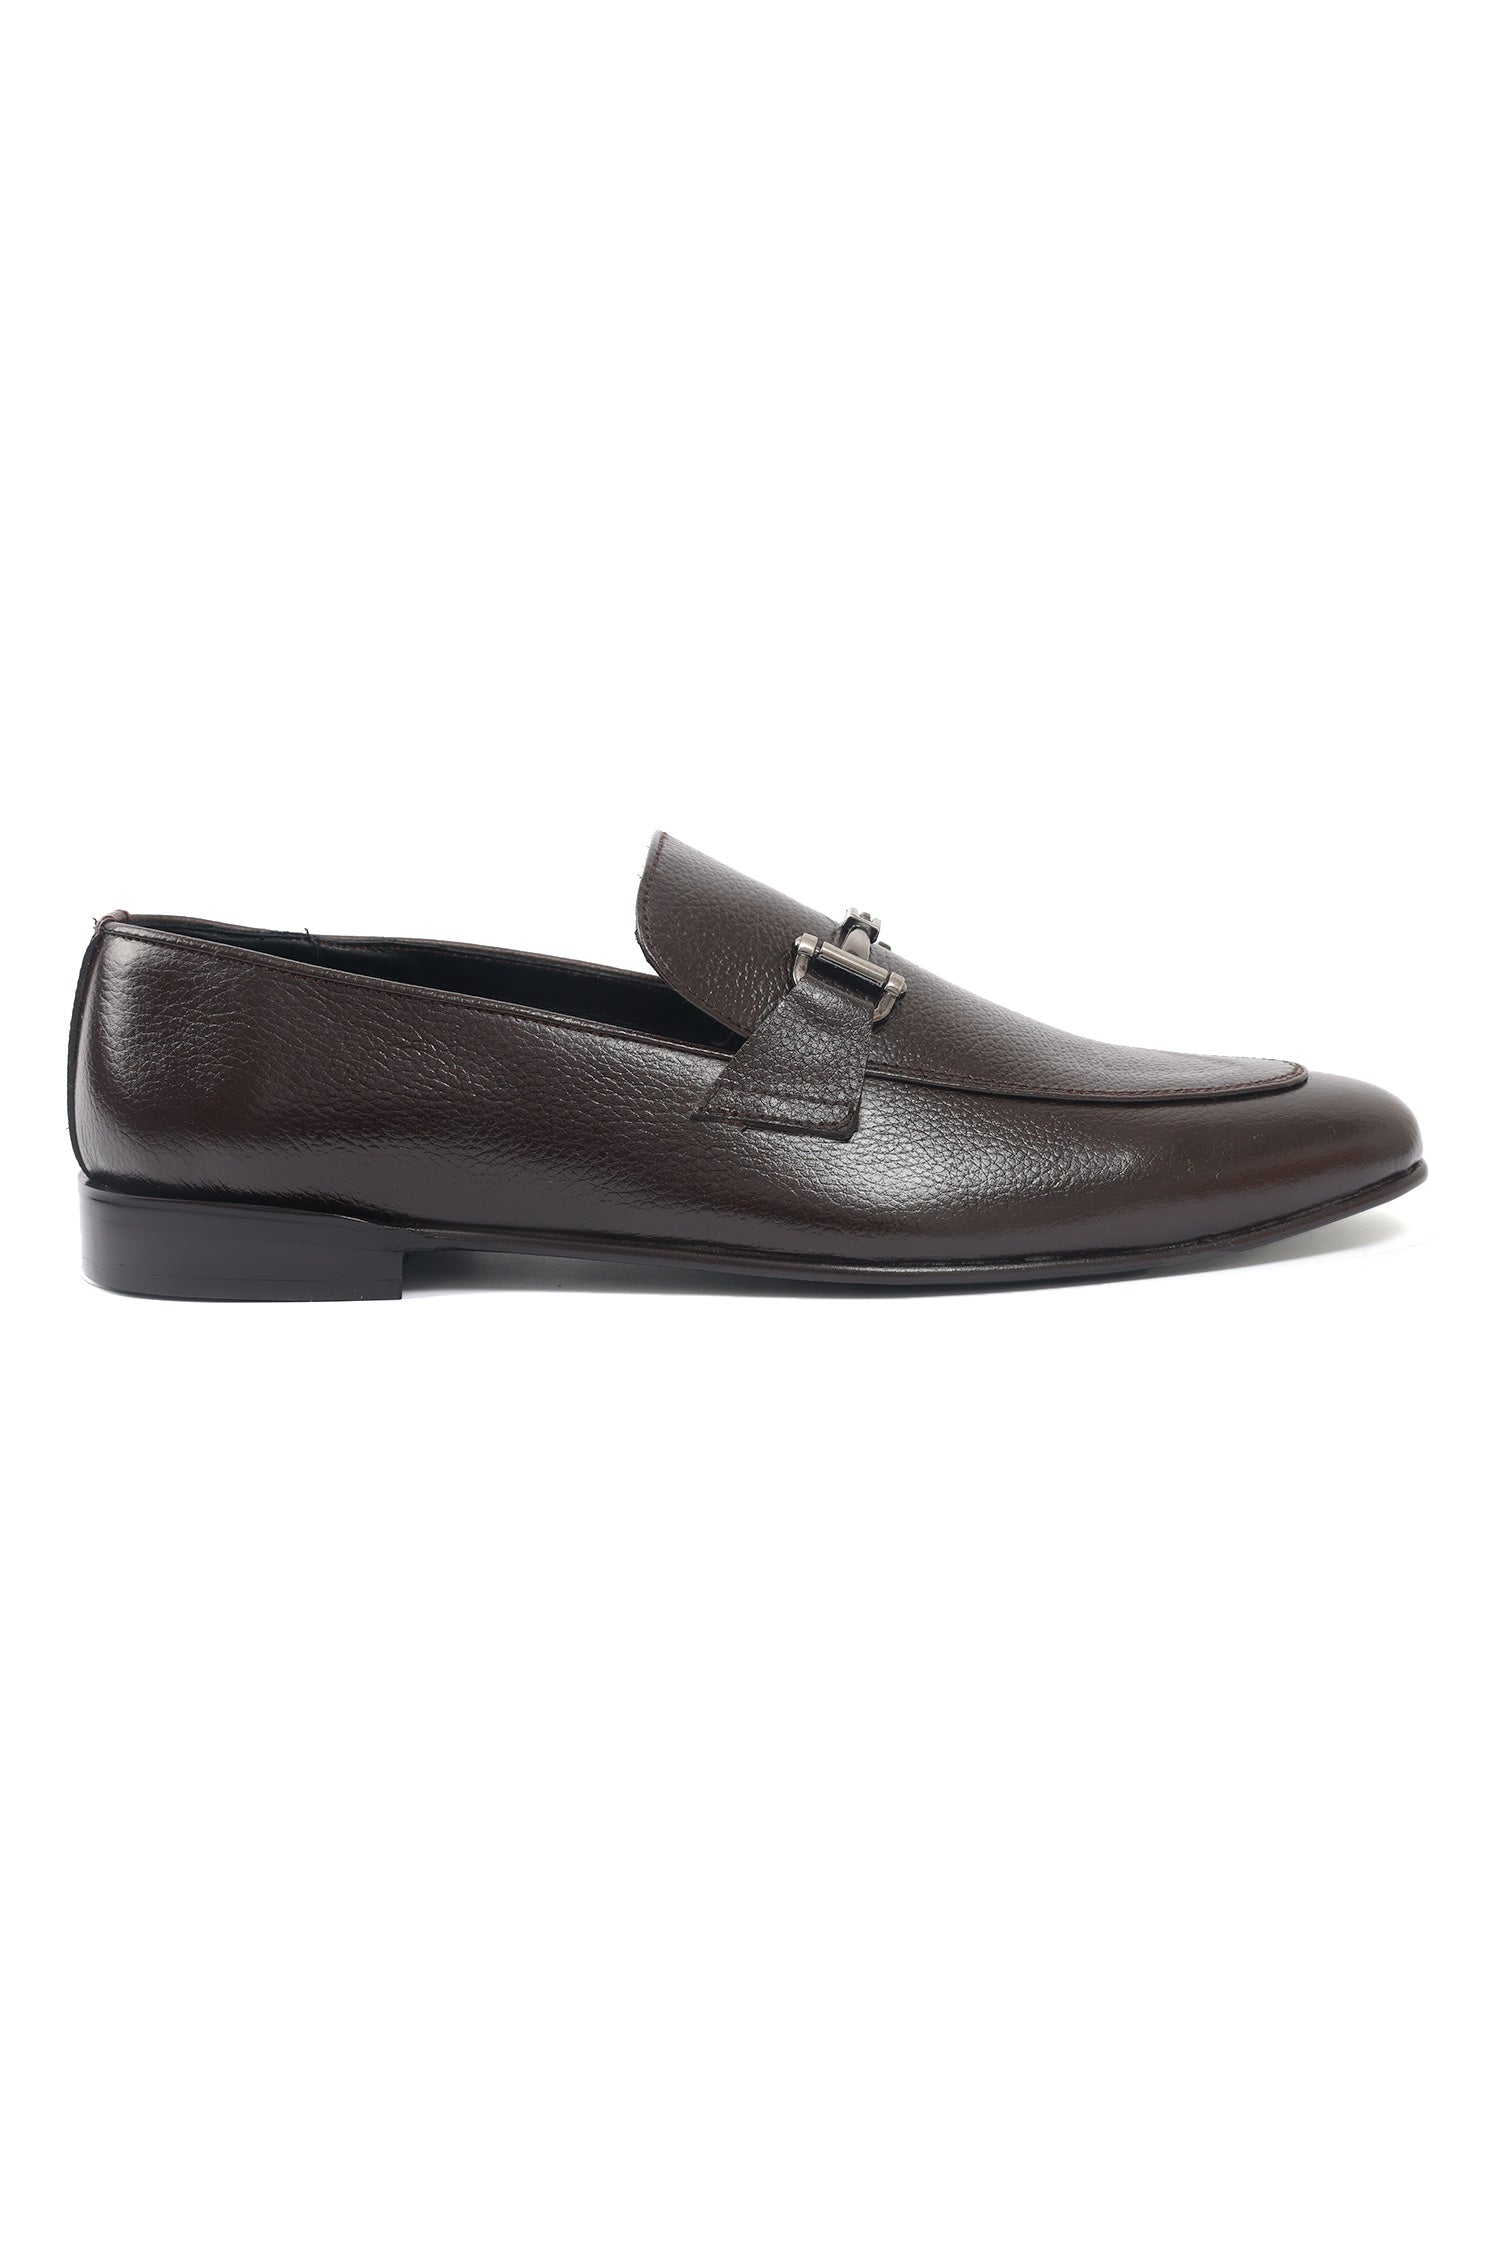 LEATHER LOAFERS-COFFEE